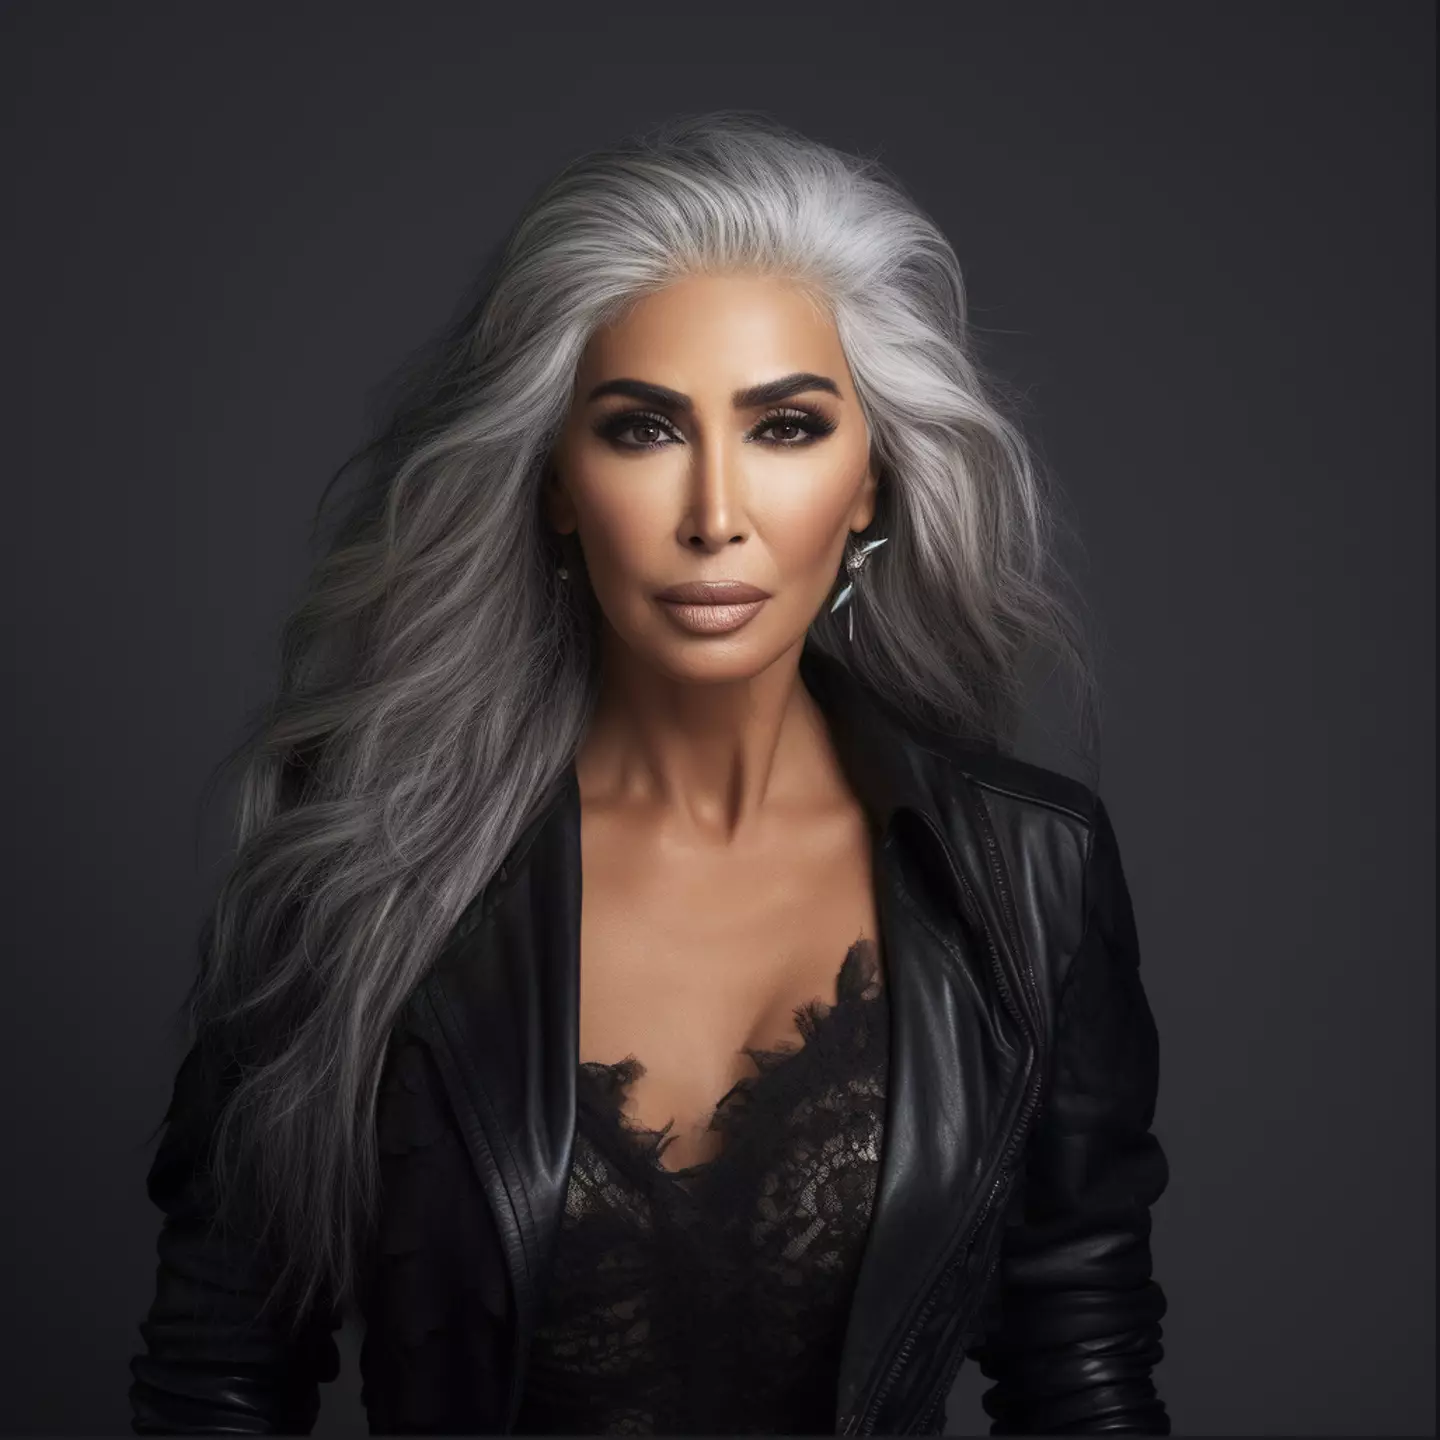 Kim will embrace the grey hair apparently.